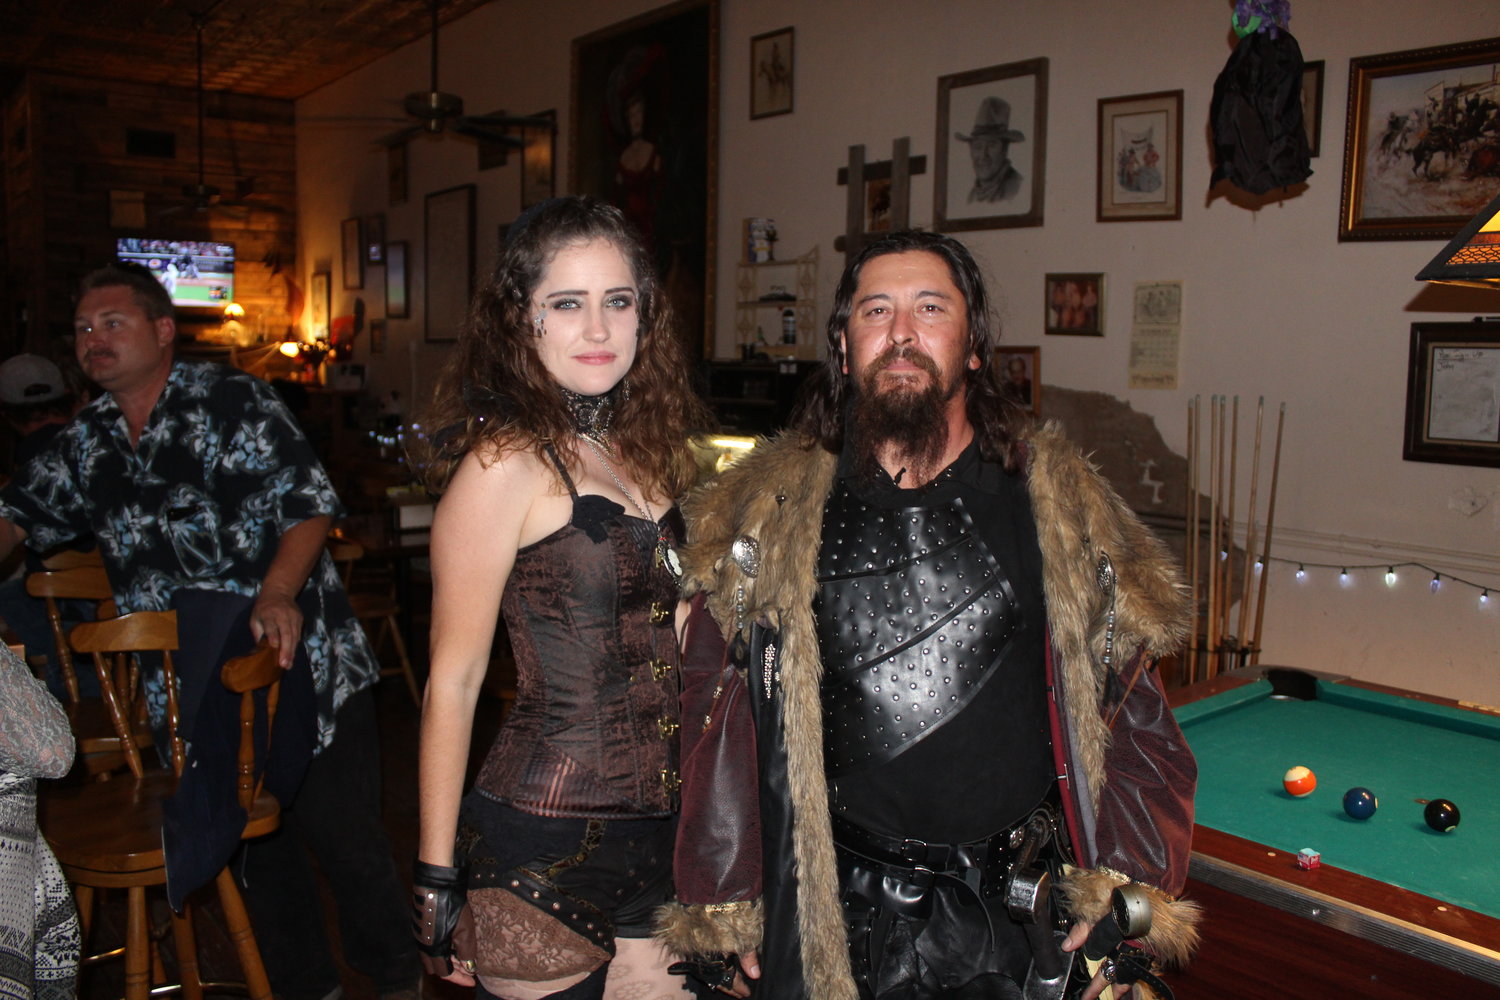 On the left is Jess Clayton who was awarded first place in the 2019 costume contest, on the right is Eric Flores who won the previous year’s contest. 